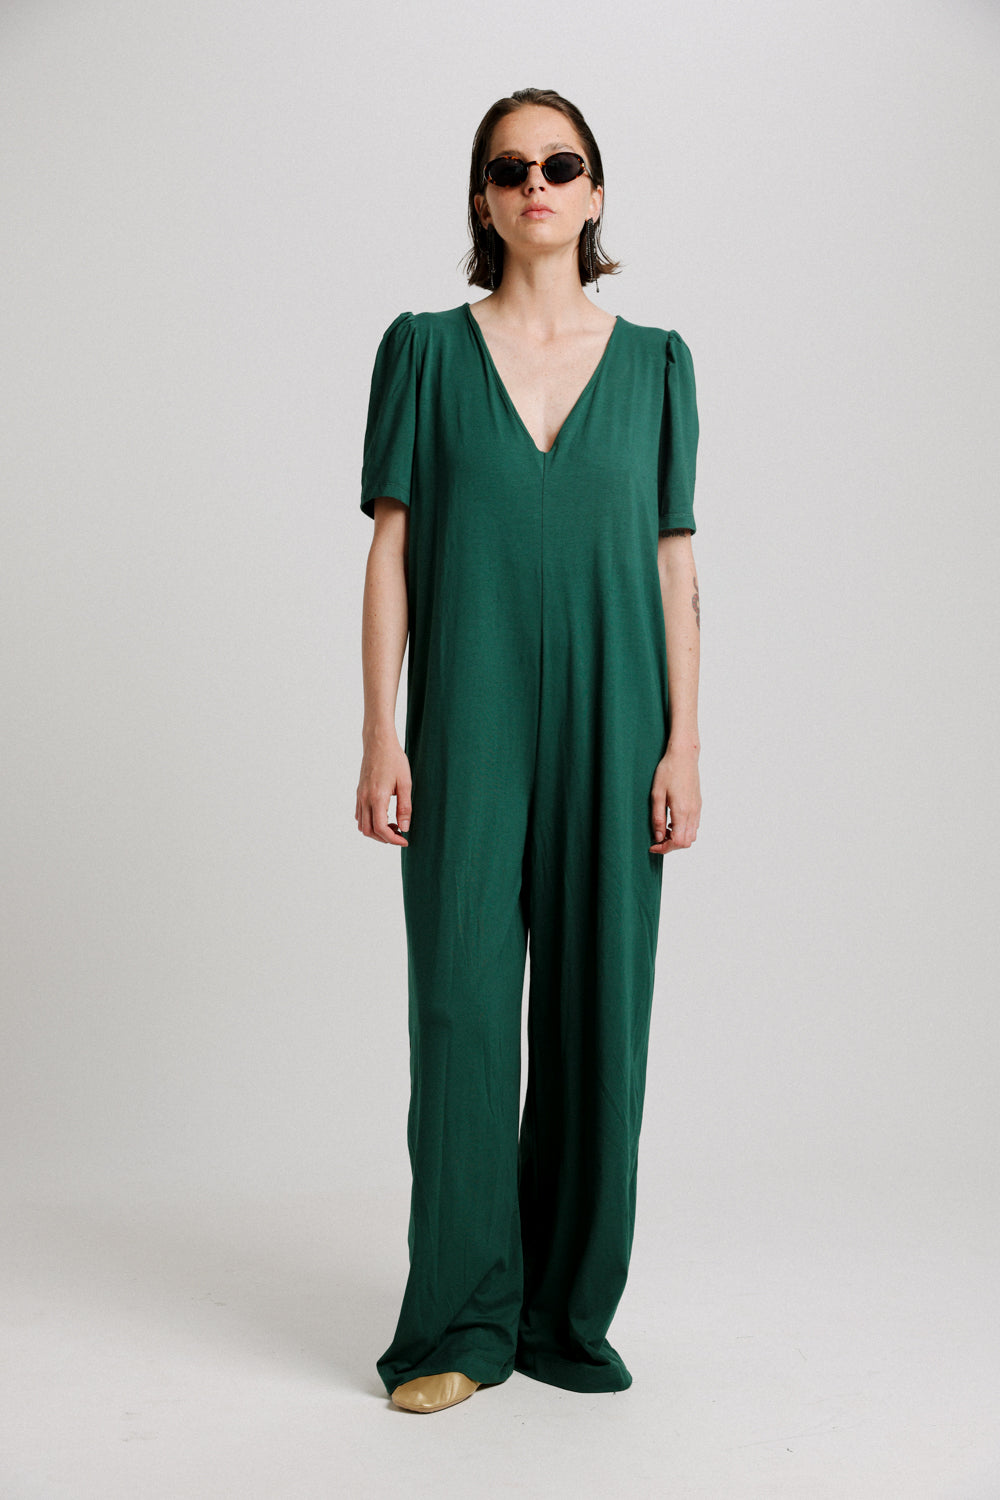 First Green Jumpsuit